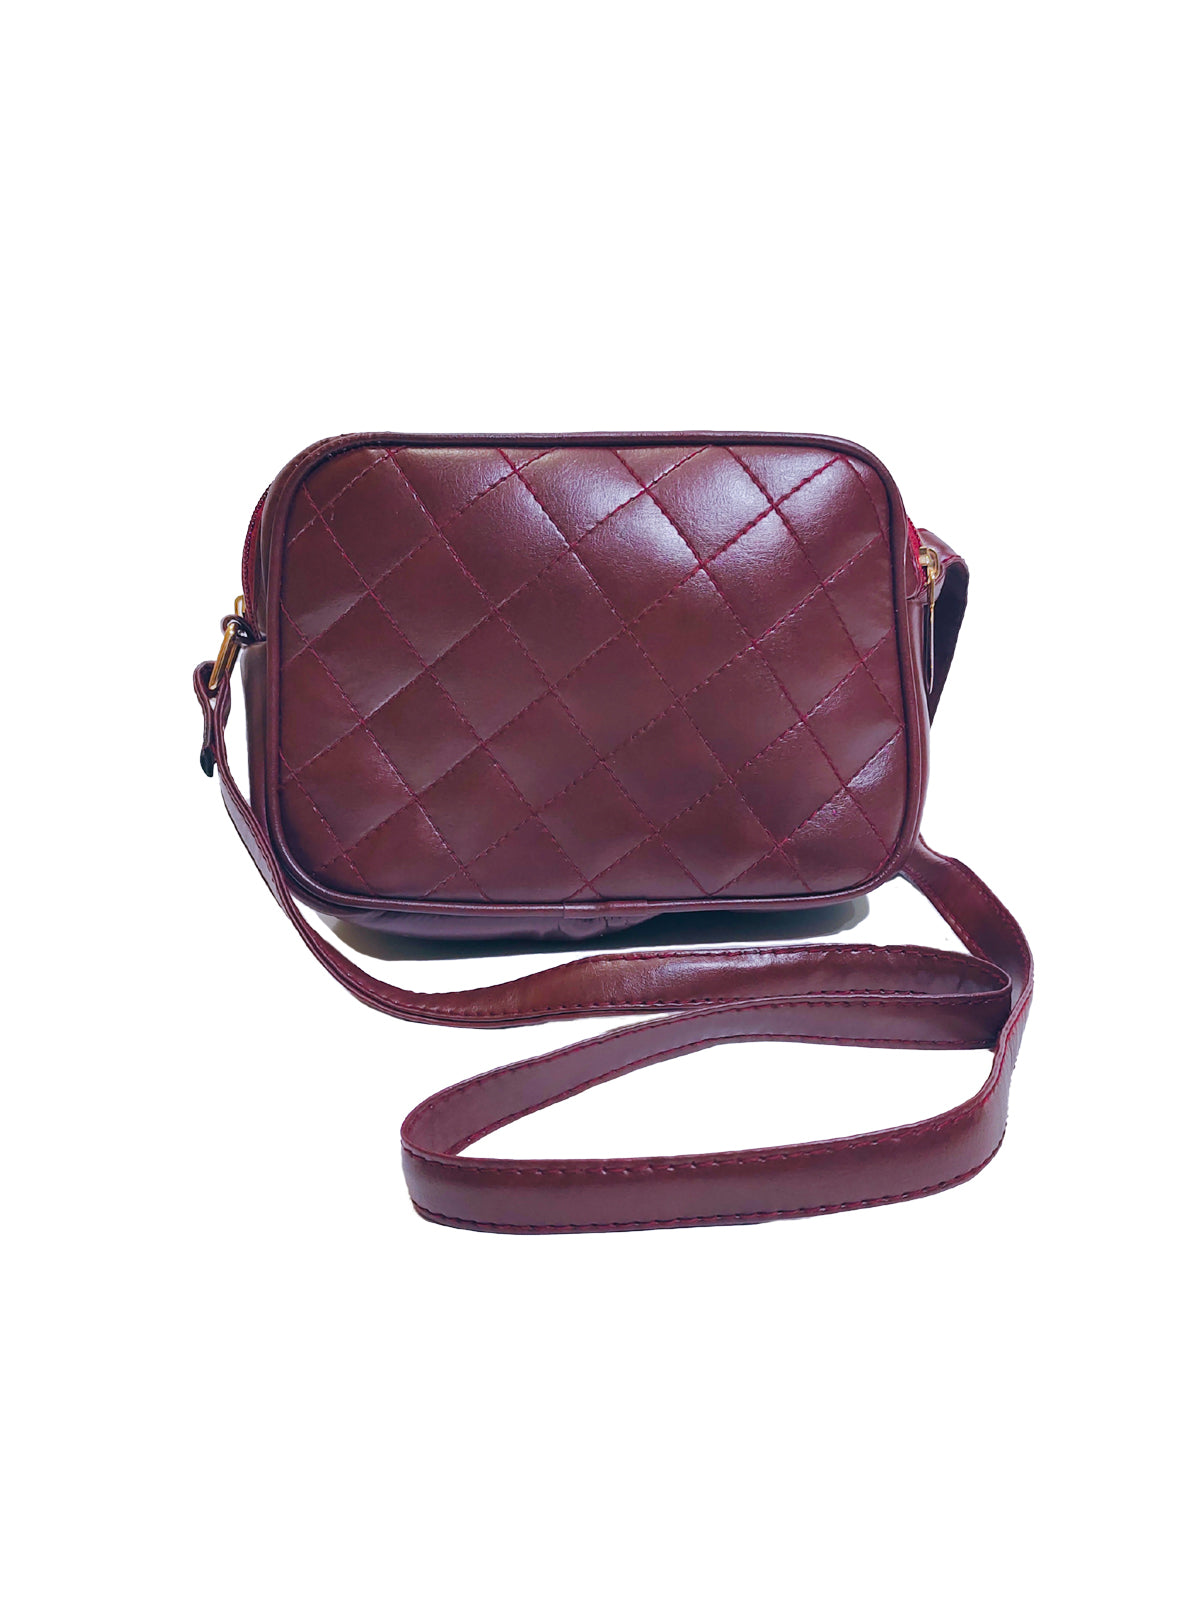 Leather Checked Makeup Pouch| Buy Cosmetic Bag Online in Pakistan